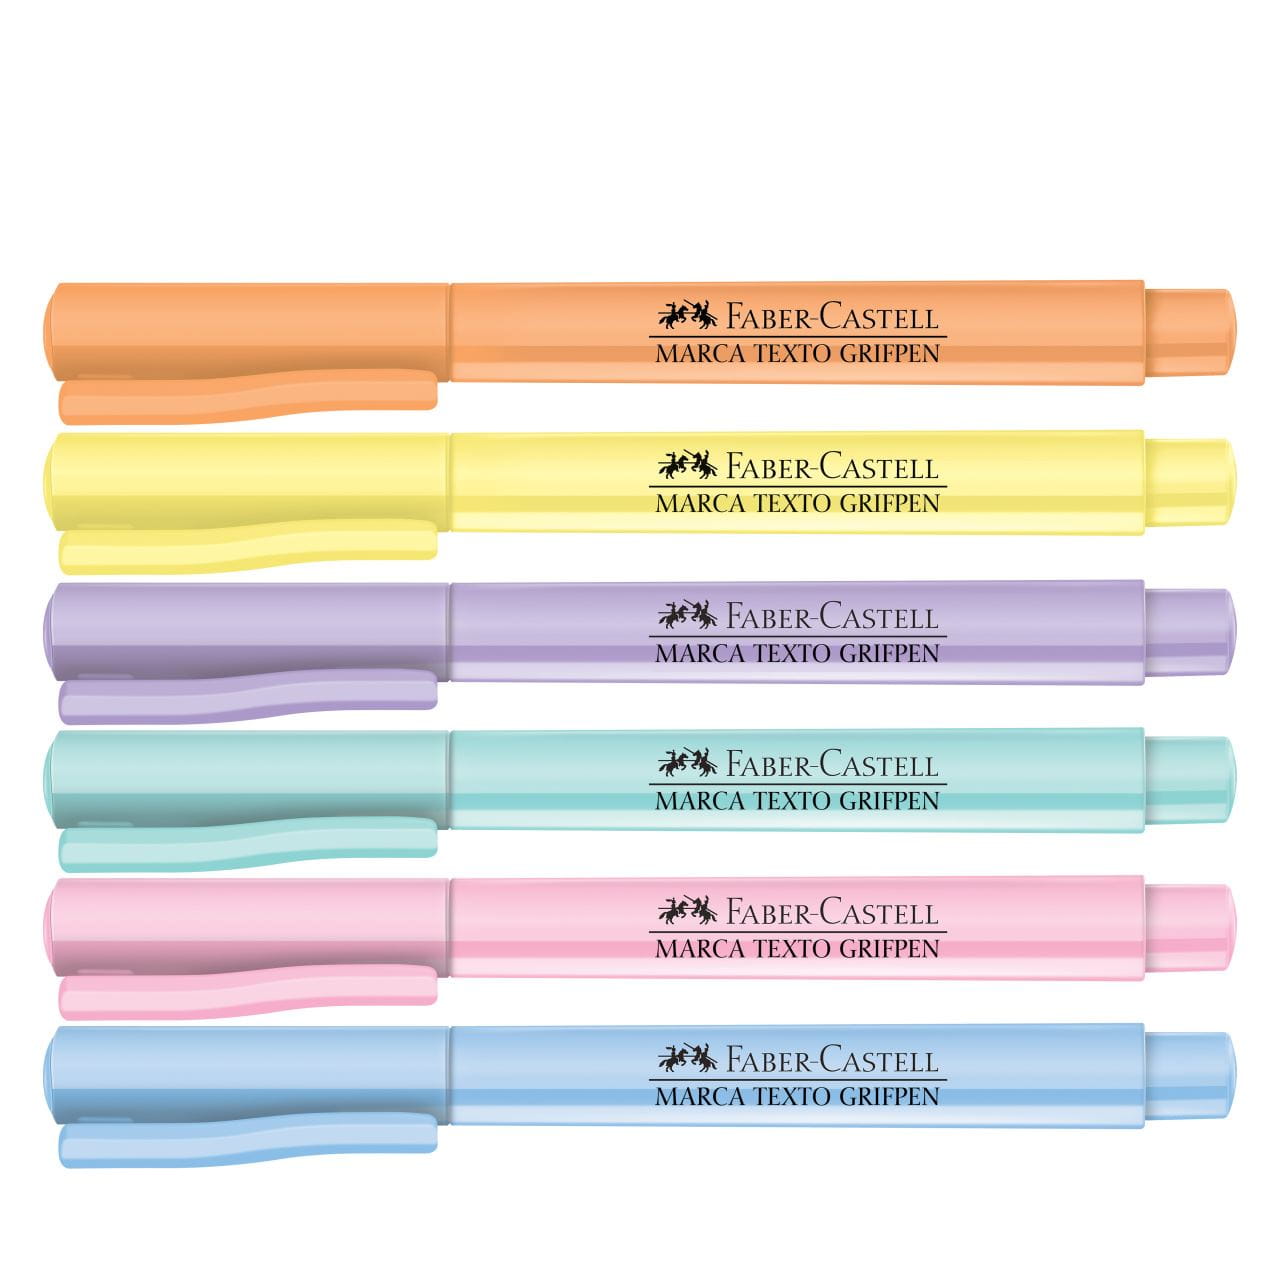 Faber-Castell - Marca Texto Grifpen Tons Pastel